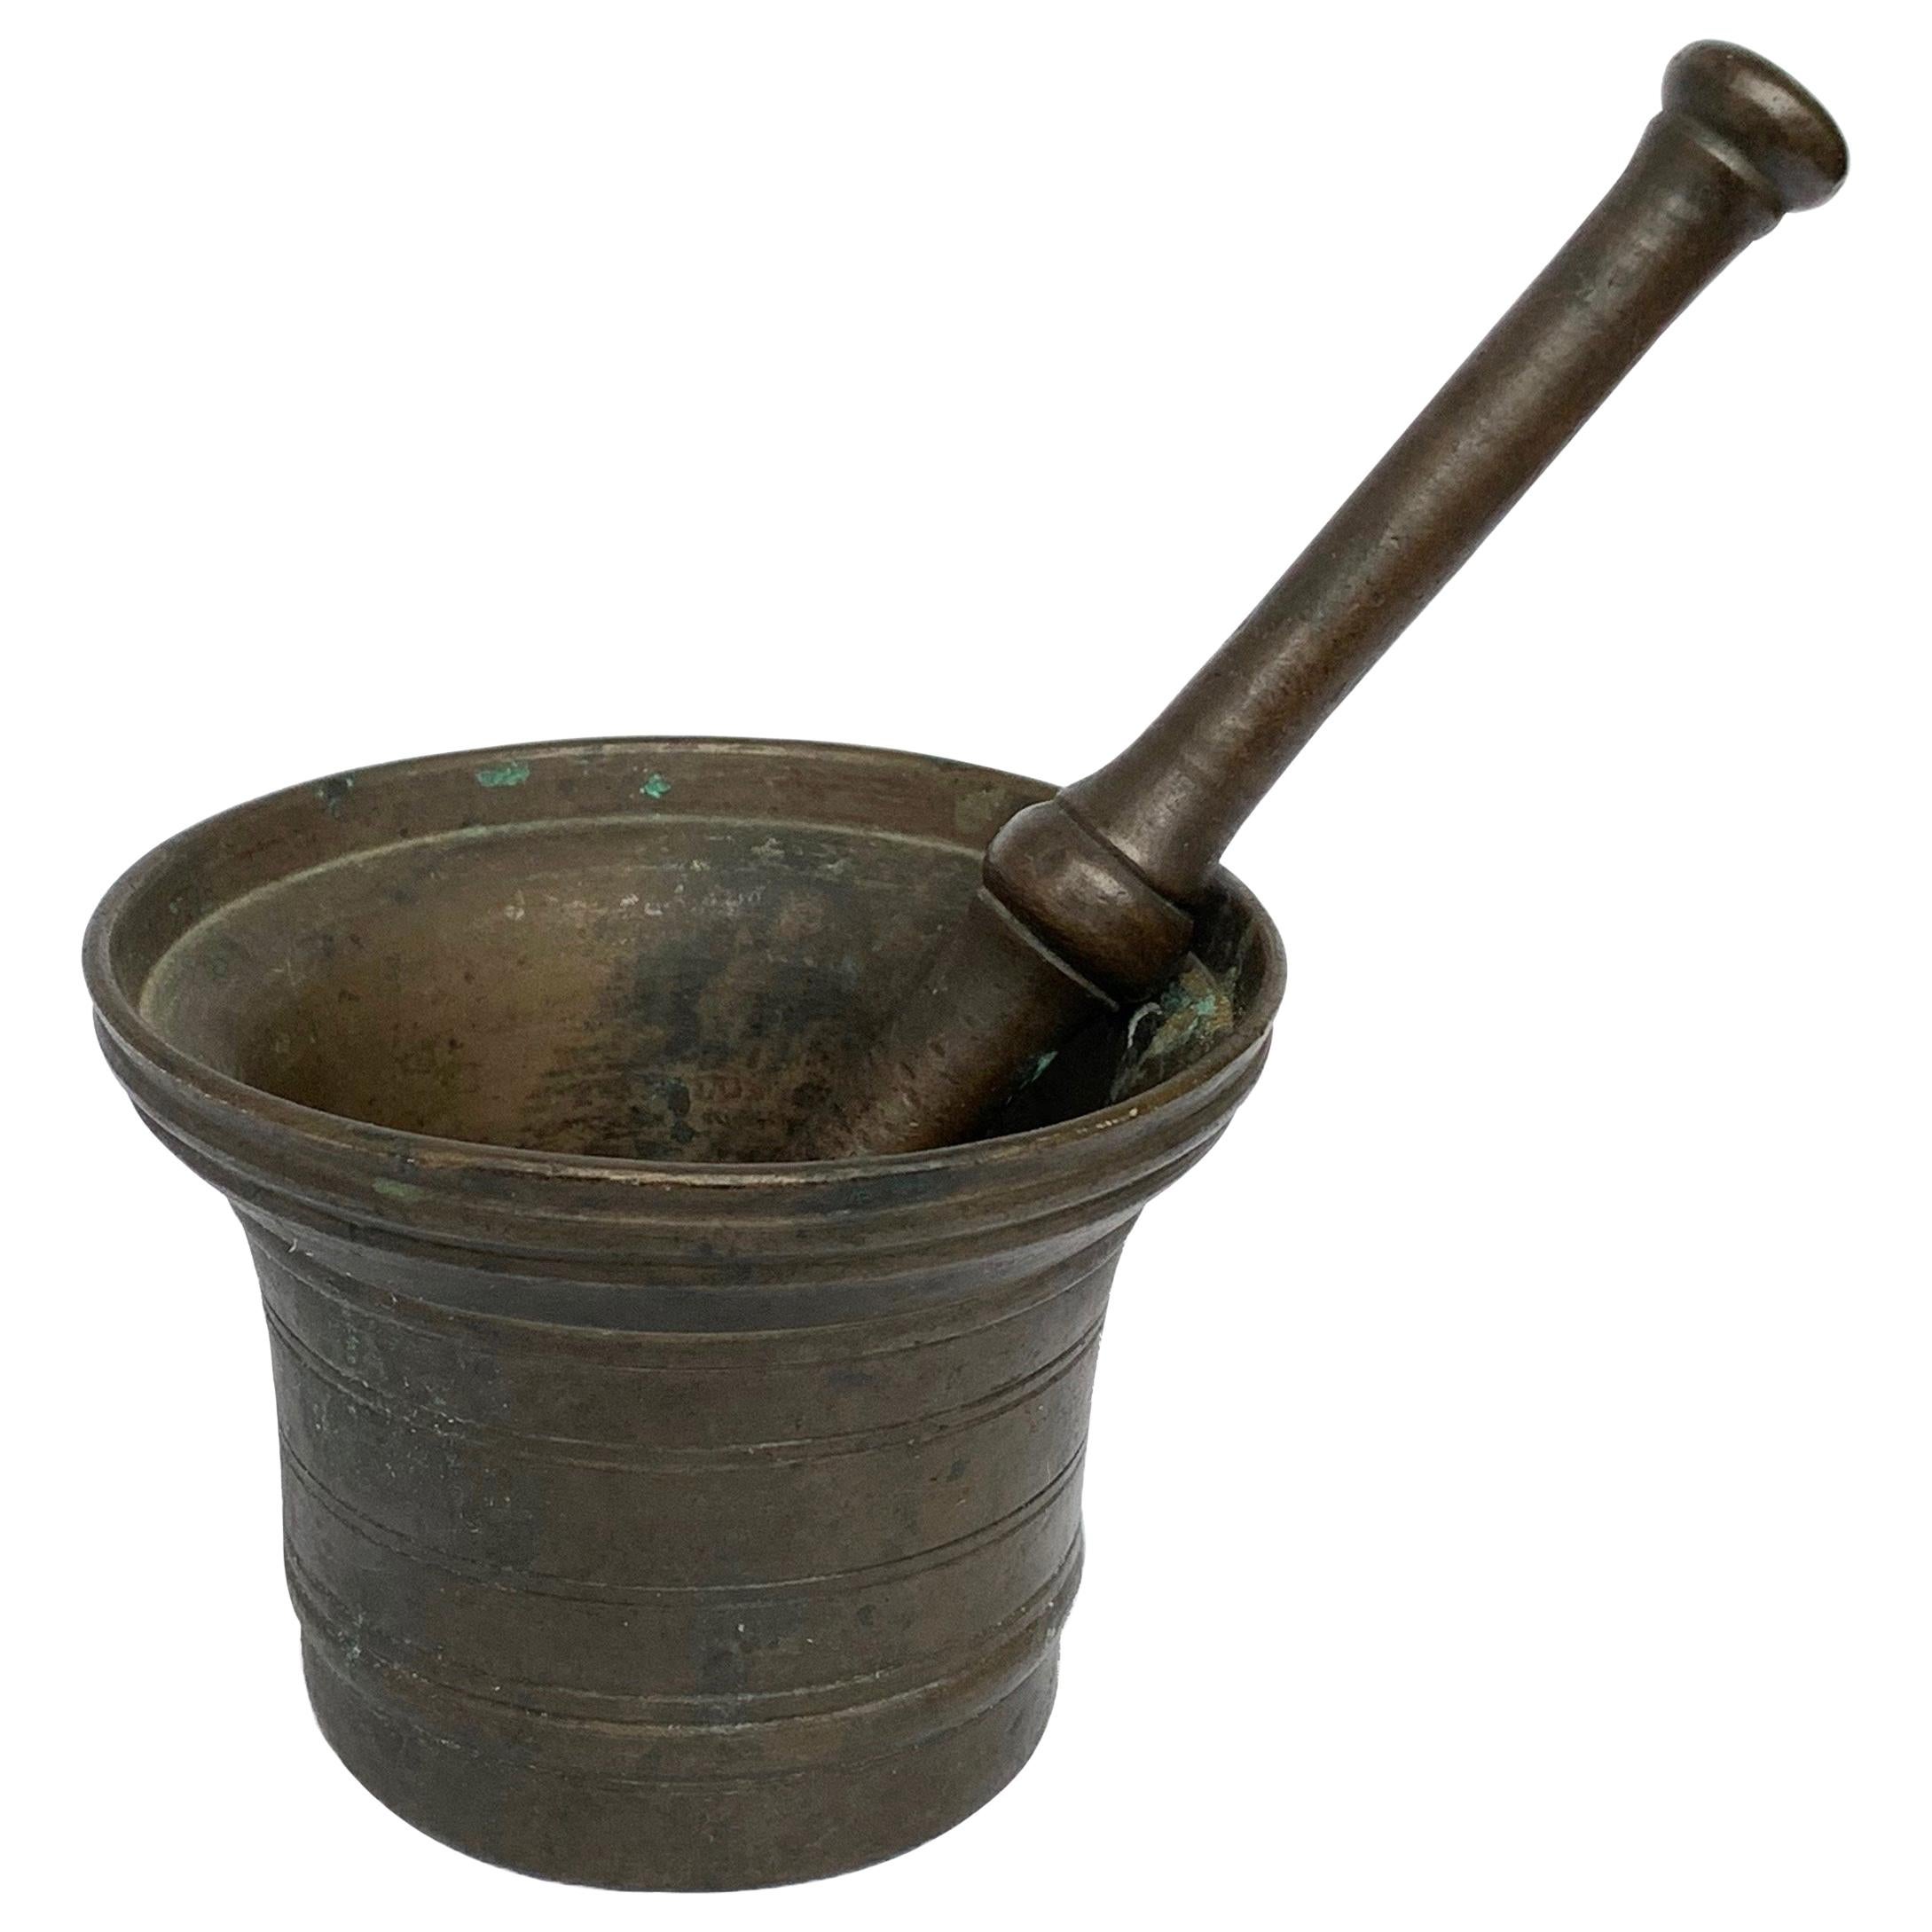 Italian Bronze Mortar and Pestle, Original Patina, Italy, Pharmacy or Herbalist For Sale